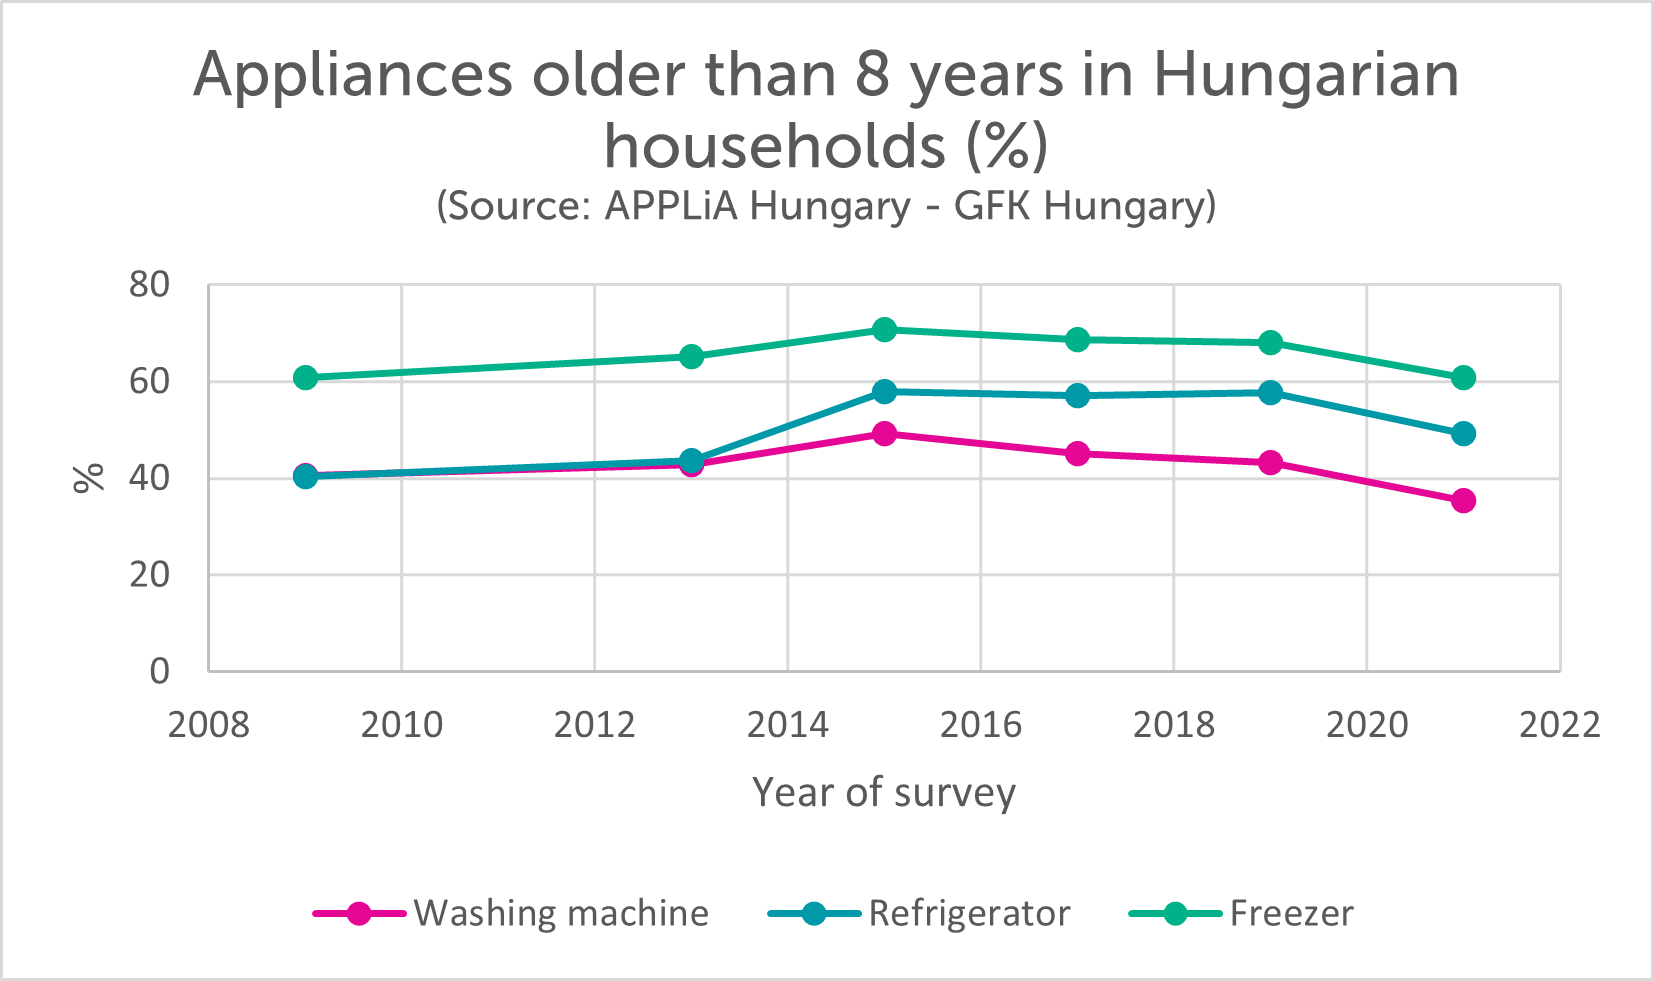 Appliances older than 8 years in Hungarian households.